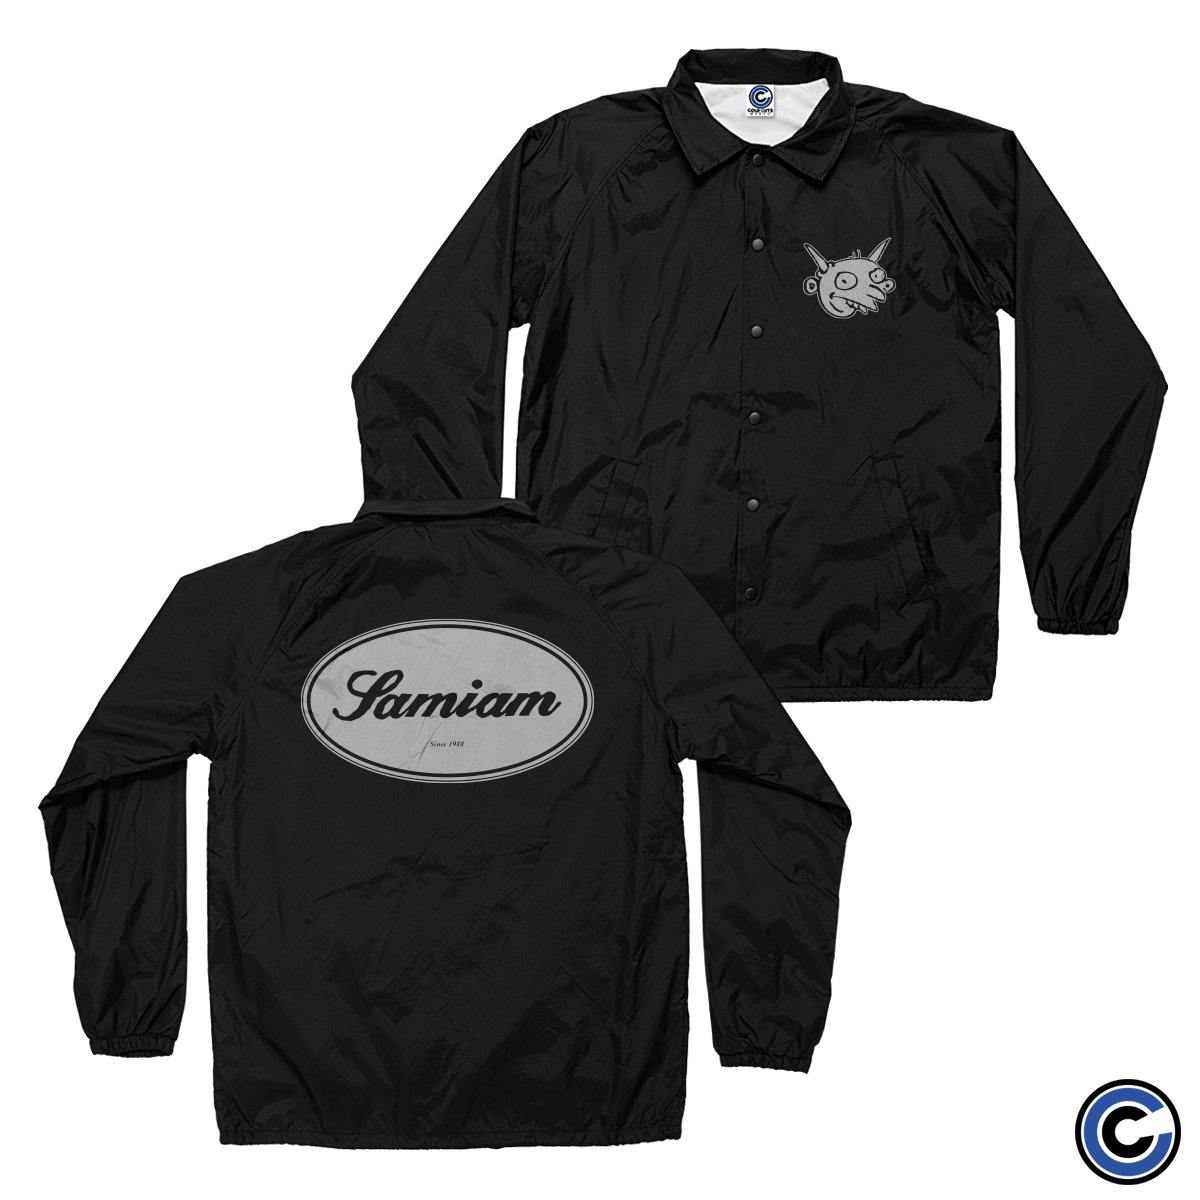 Buy – Samiam "Oval" Coaches Jacket – Band & Music Merch – Cold Cuts Merch